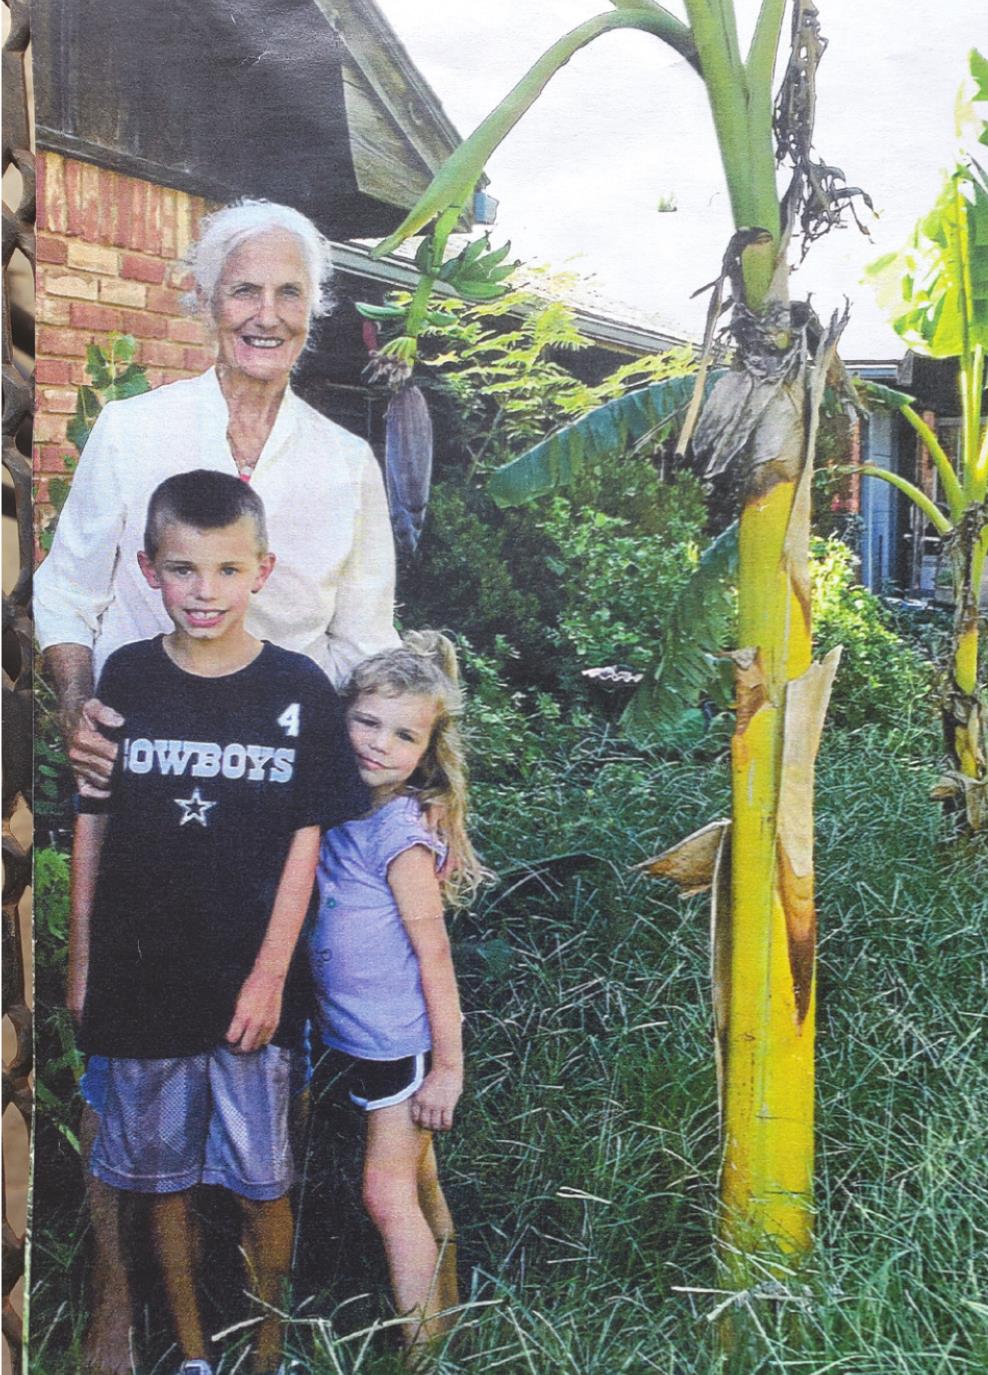 Carol Henderson stands next to her banana plant with grandchildren Keon, left, and Khloe Lackey. This picture is from 2017, when she originally placed the plants. Provided